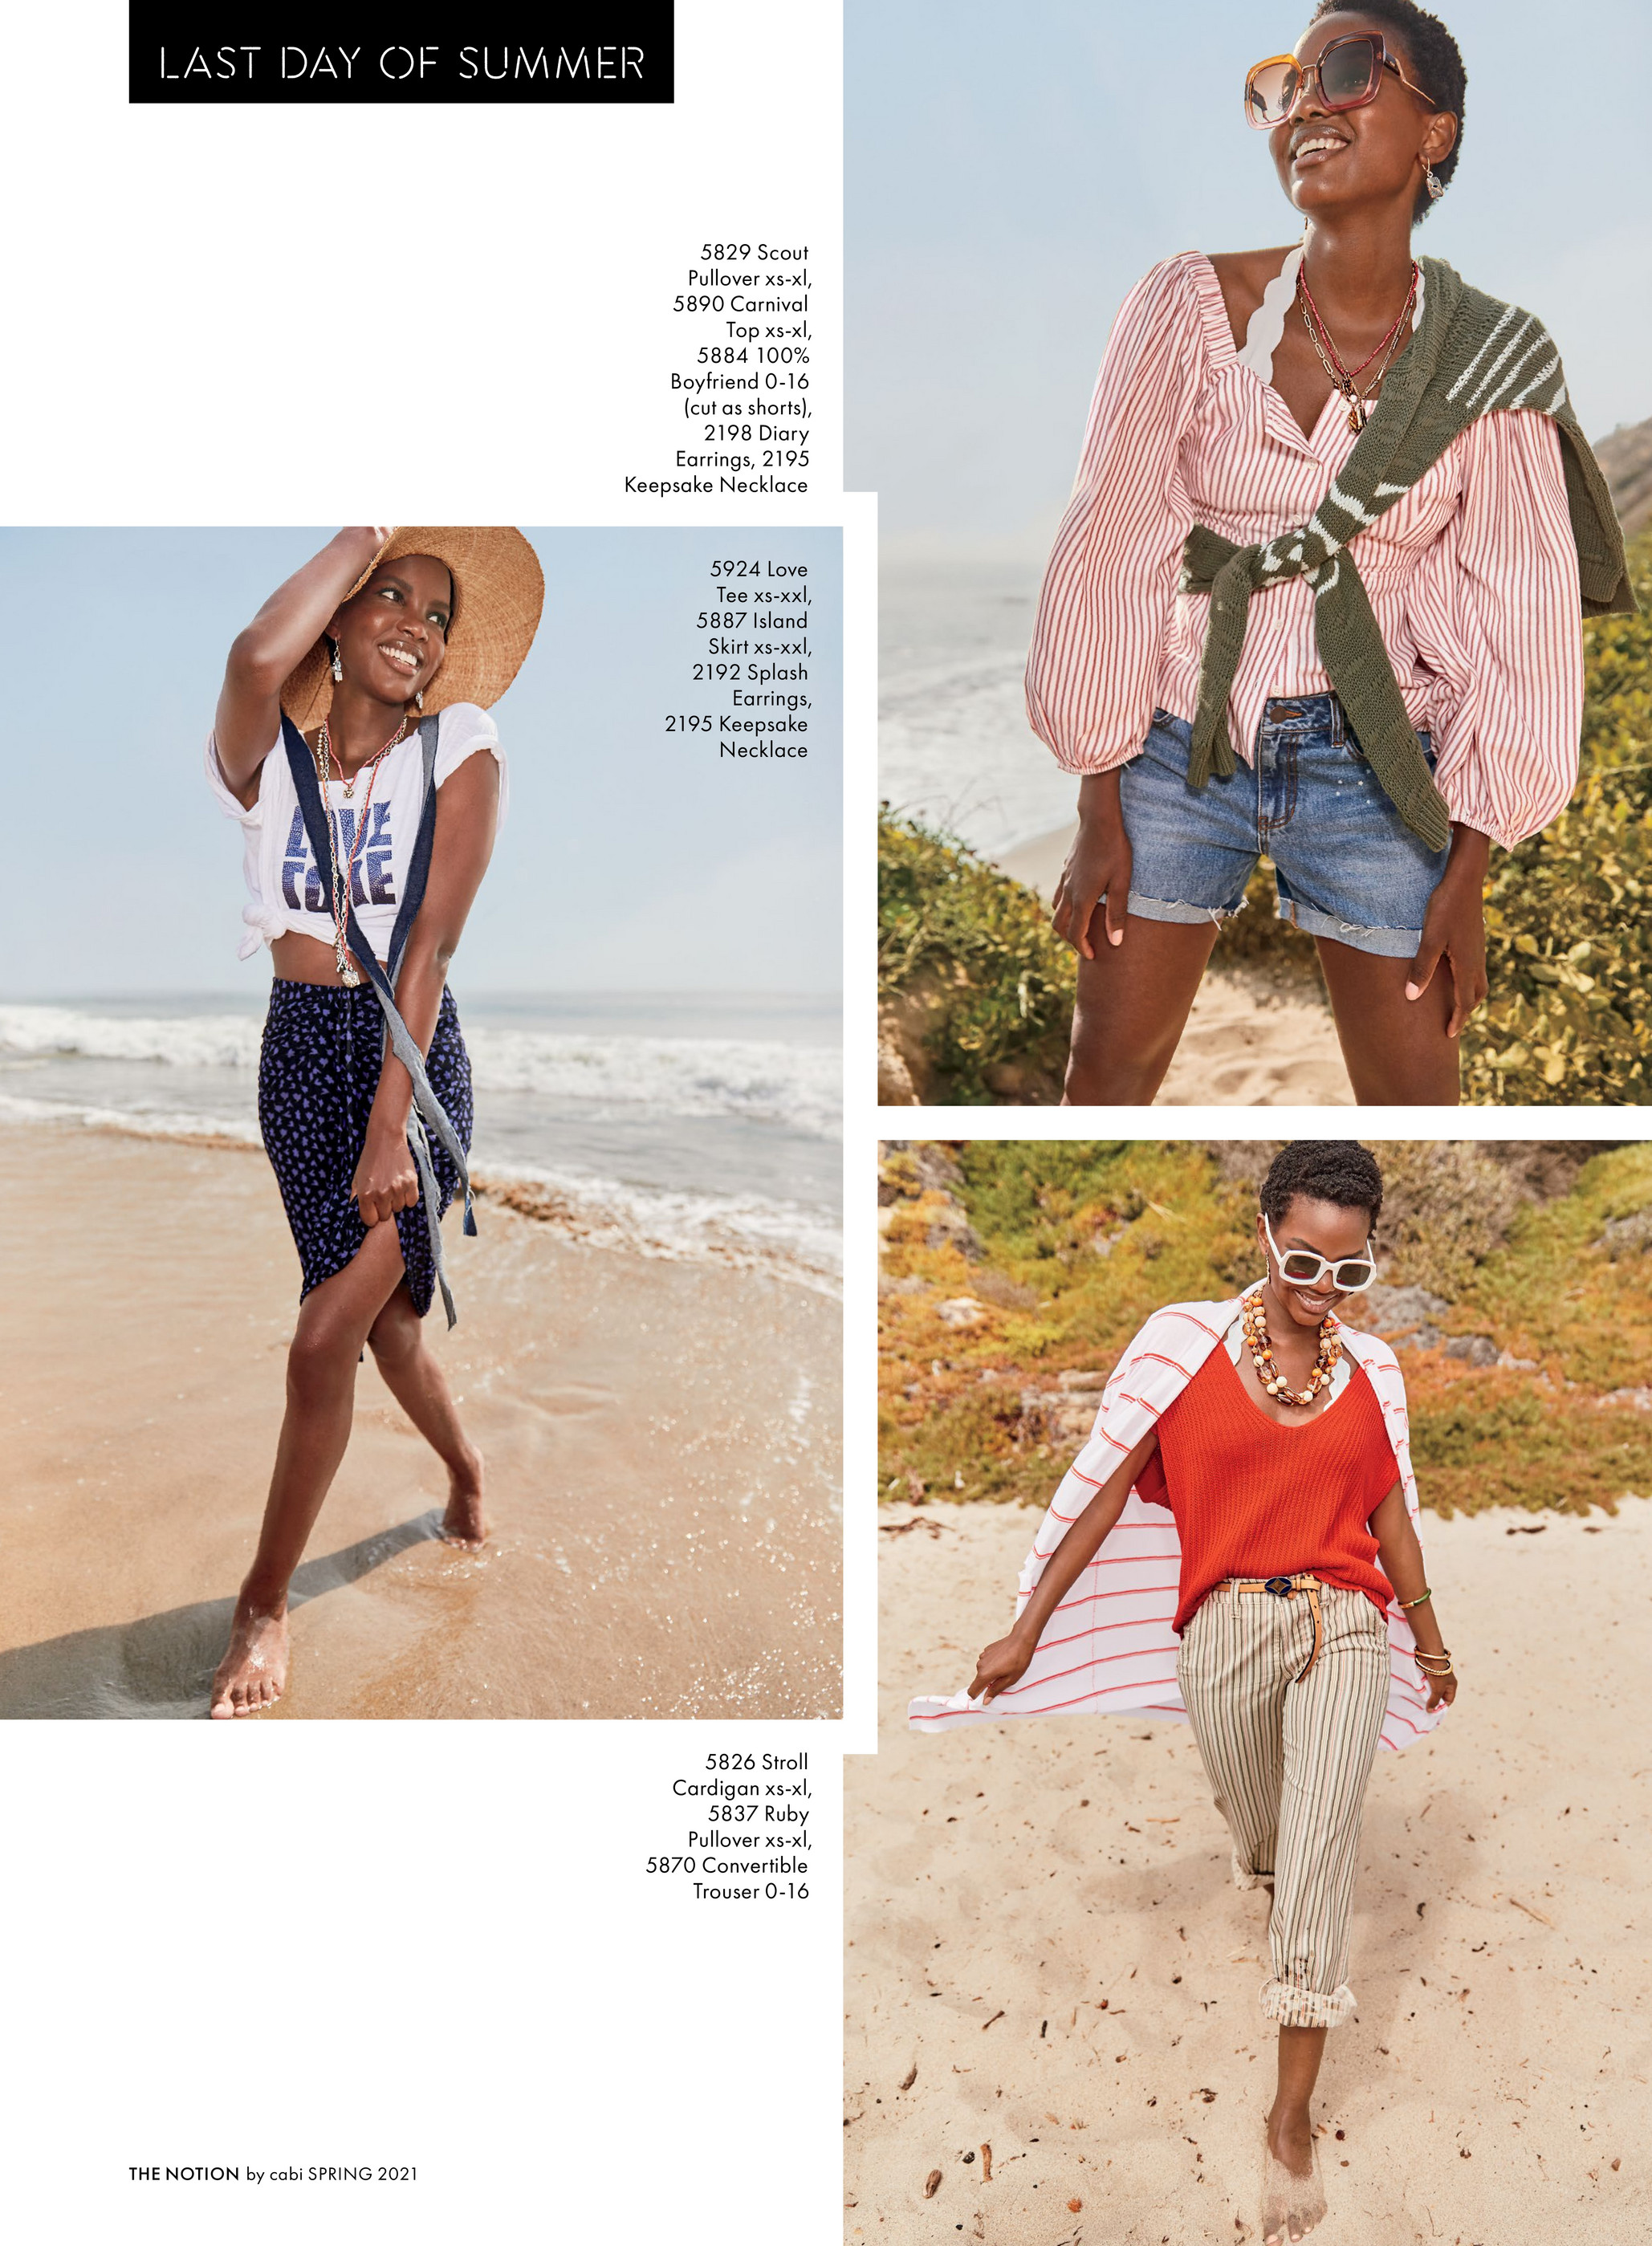 Cabi - Spring 2021 Notion - Page 6-7